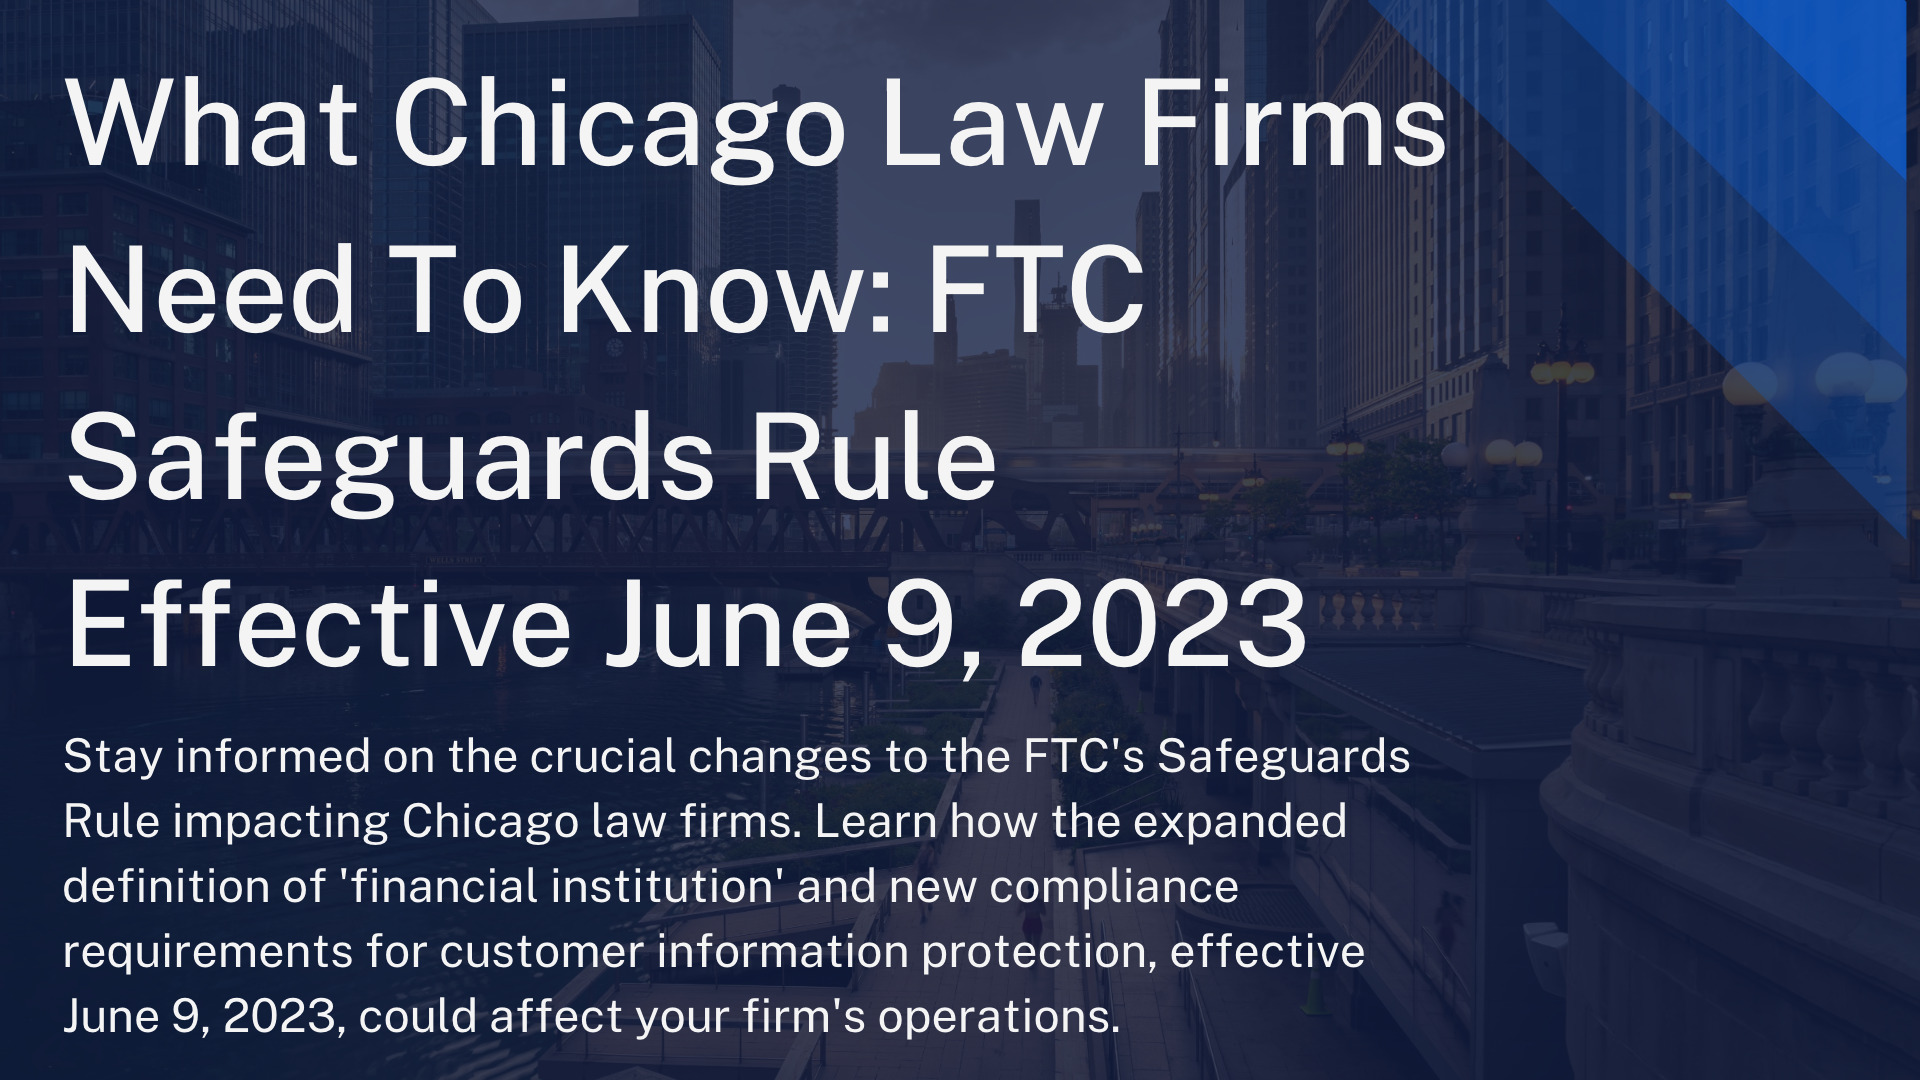 FTC Safeguards Rule And Chicago Law Firms